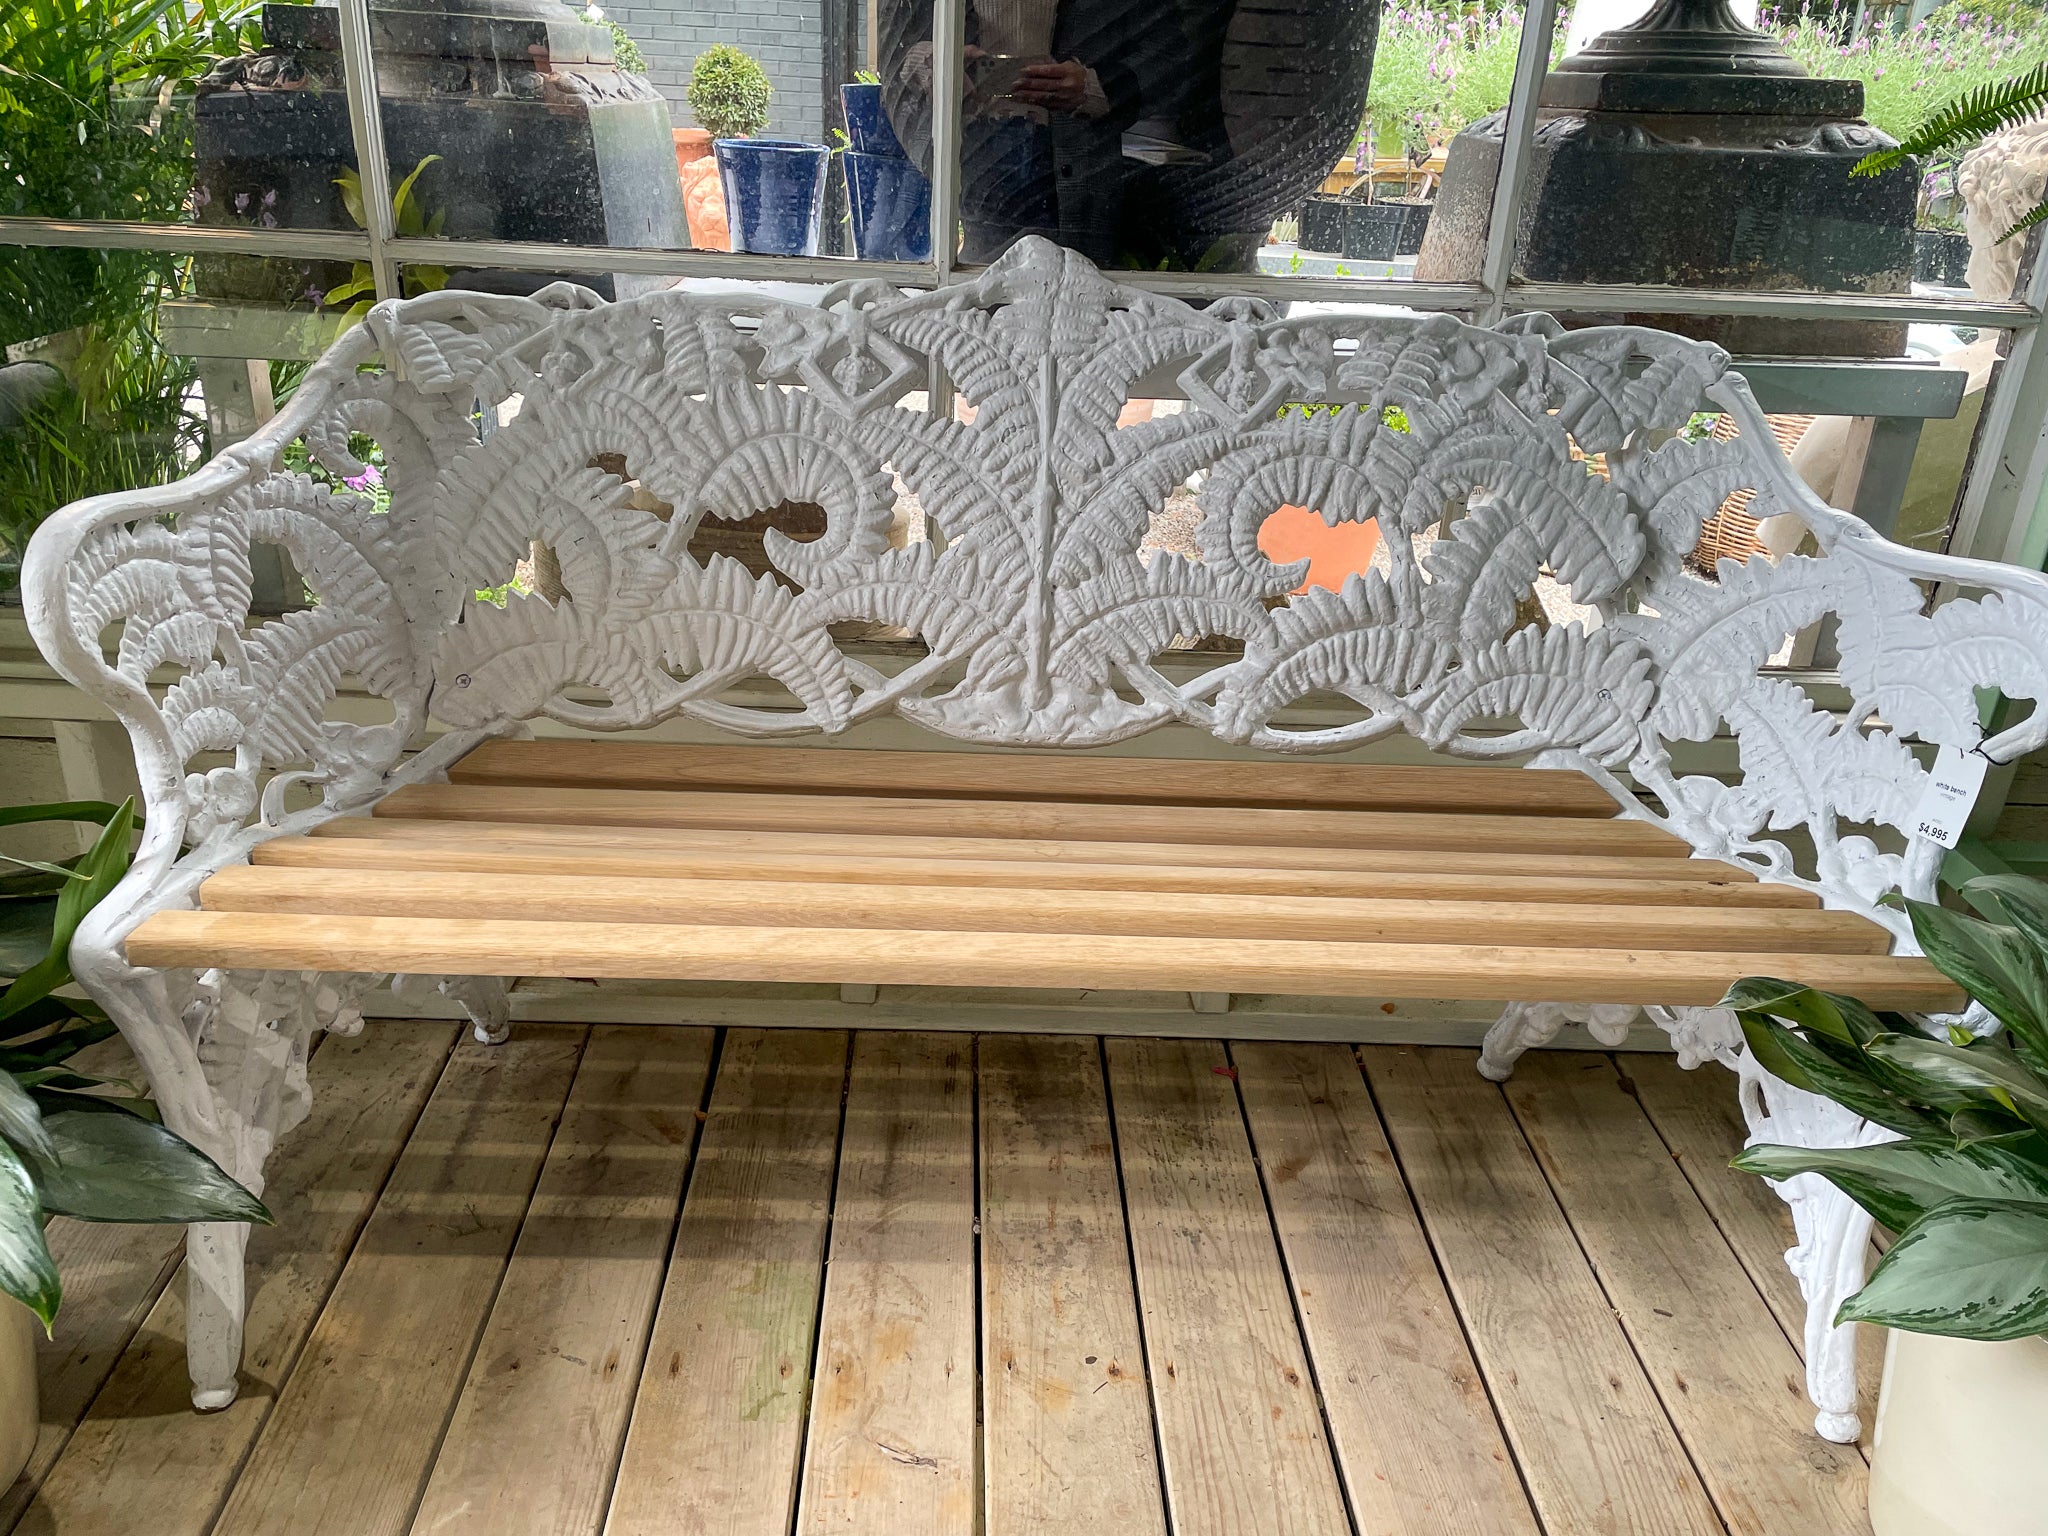 We presents for your consideration a Victorian cast iron garden bench. The bench includes white painted fern ornament to the barrel back, and a refinished wooden seat. The perfect addition to any traditional garden.